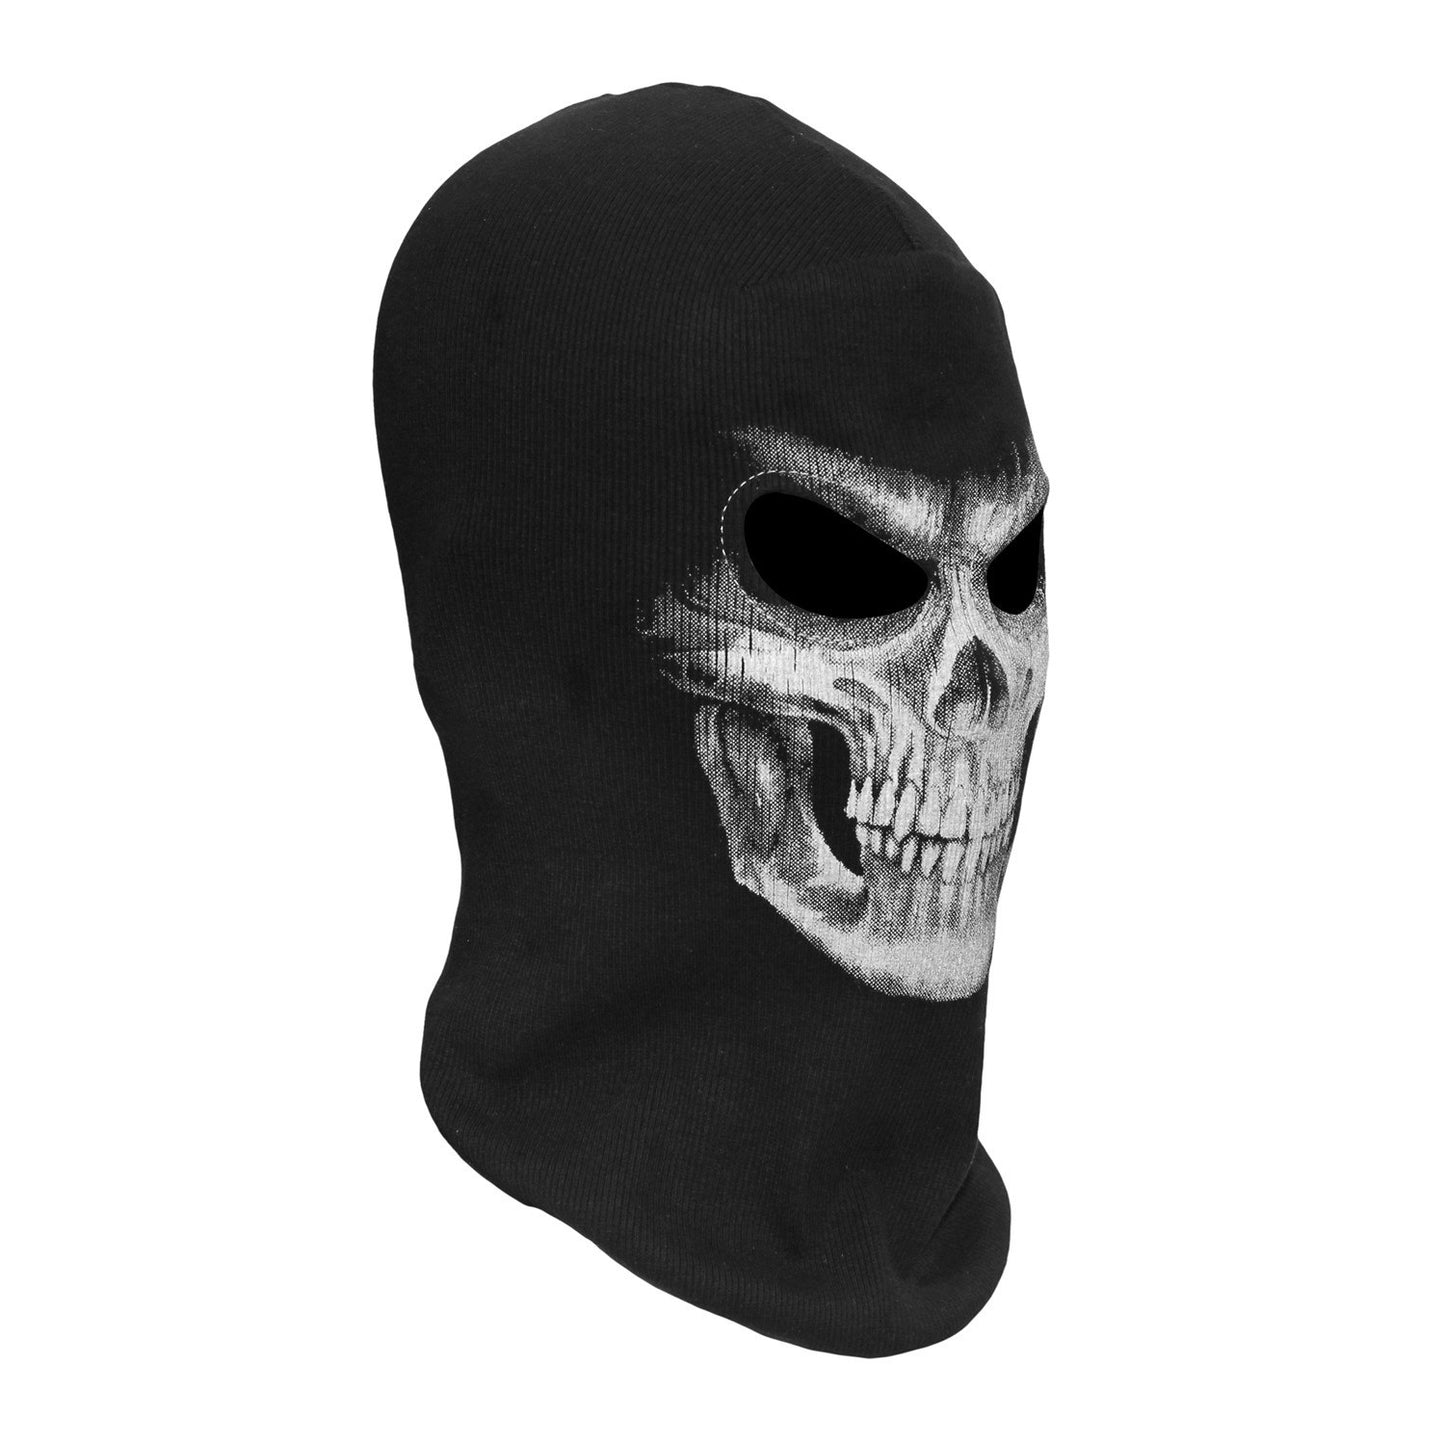 Scream Death Grim Reaper Balaclava Ghost Skull Skeleton Tactical Army Party Costume Bicycle Halloween Cosplay Full Face Masks